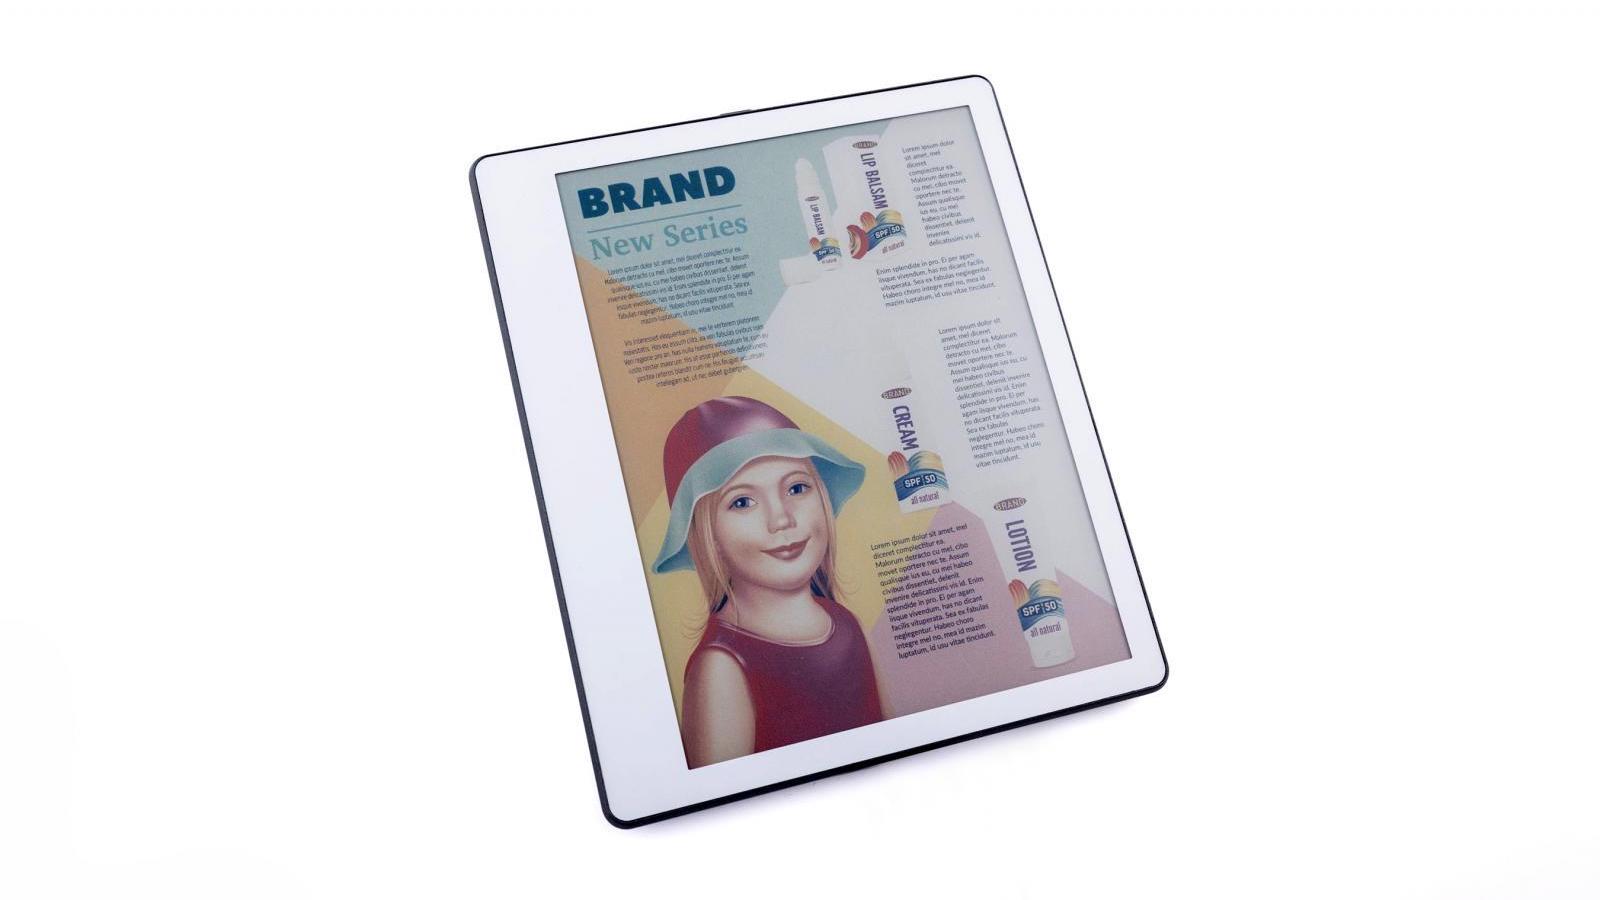 New E Ink Gallery displays could finally make full-color e-readers good